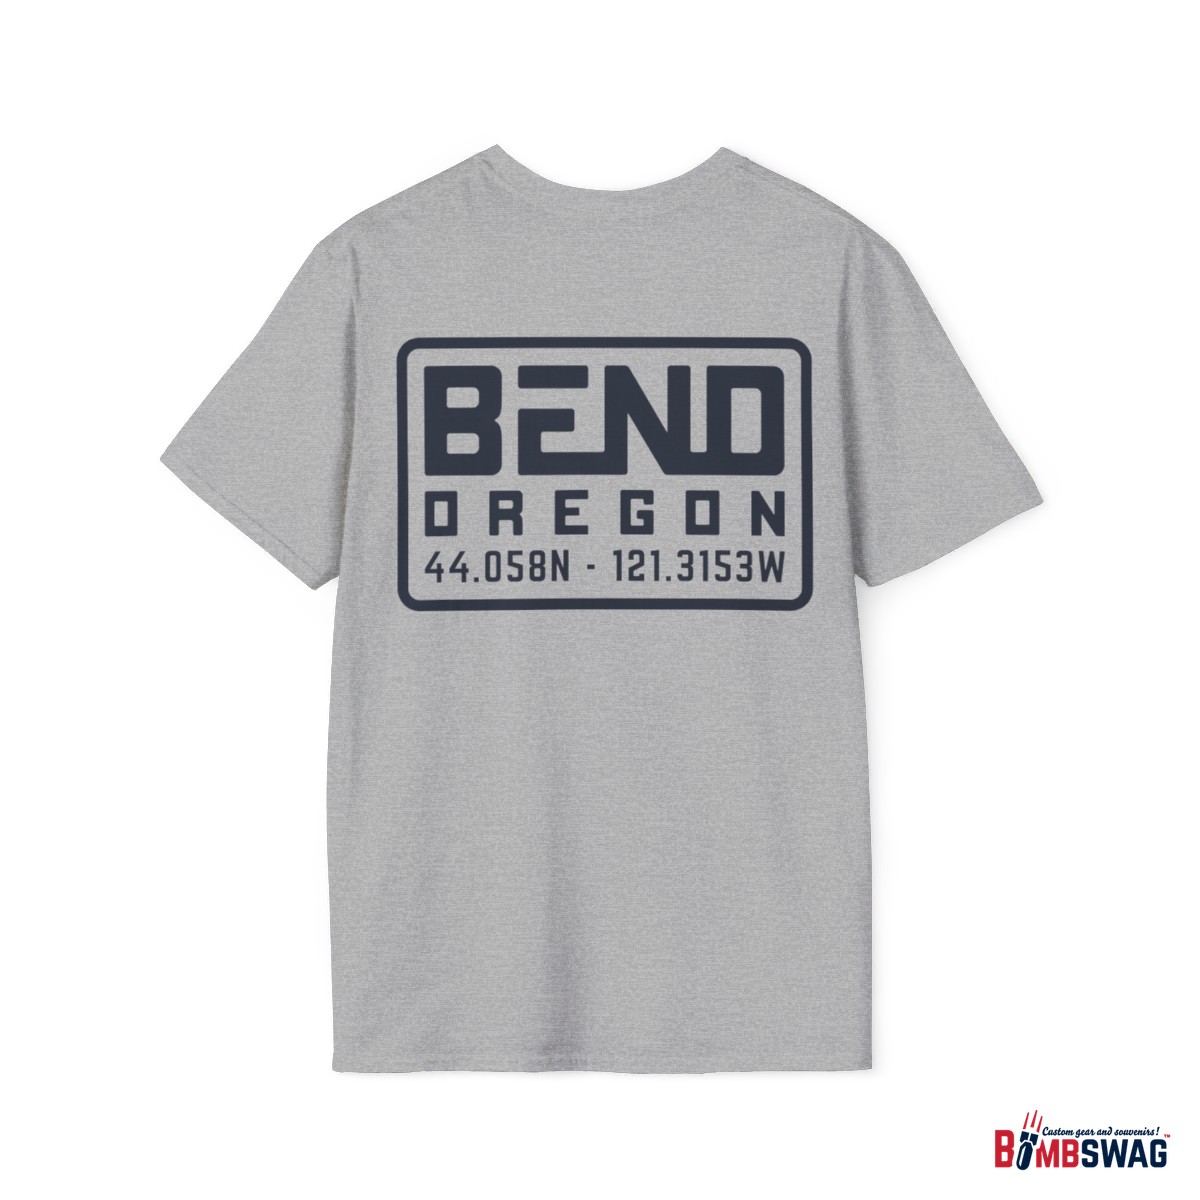 bend, or modern typeface unisex softstyle t shirt with map coordinates